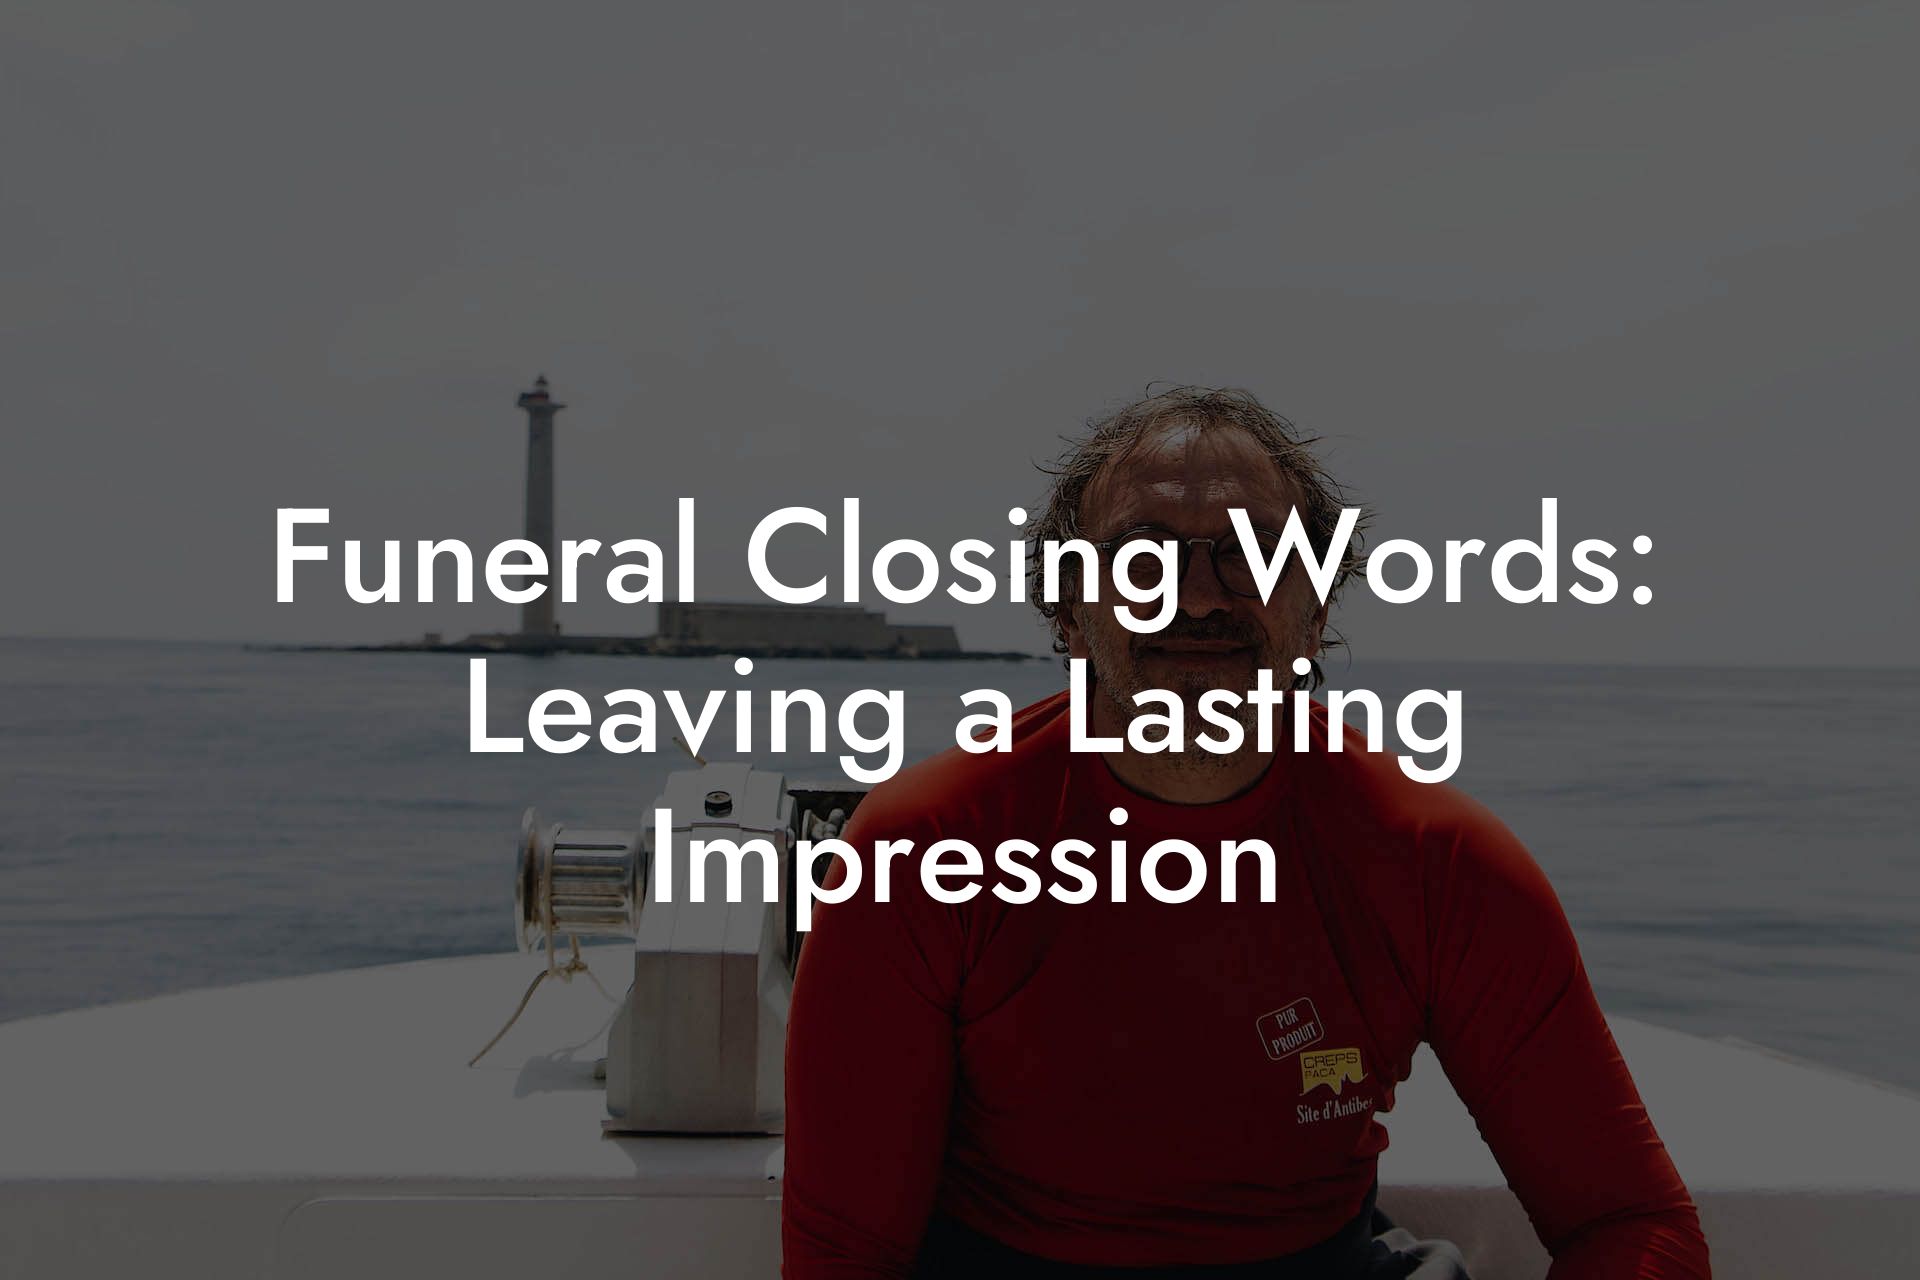 Funeral Closing Words: Leaving a Lasting Impression